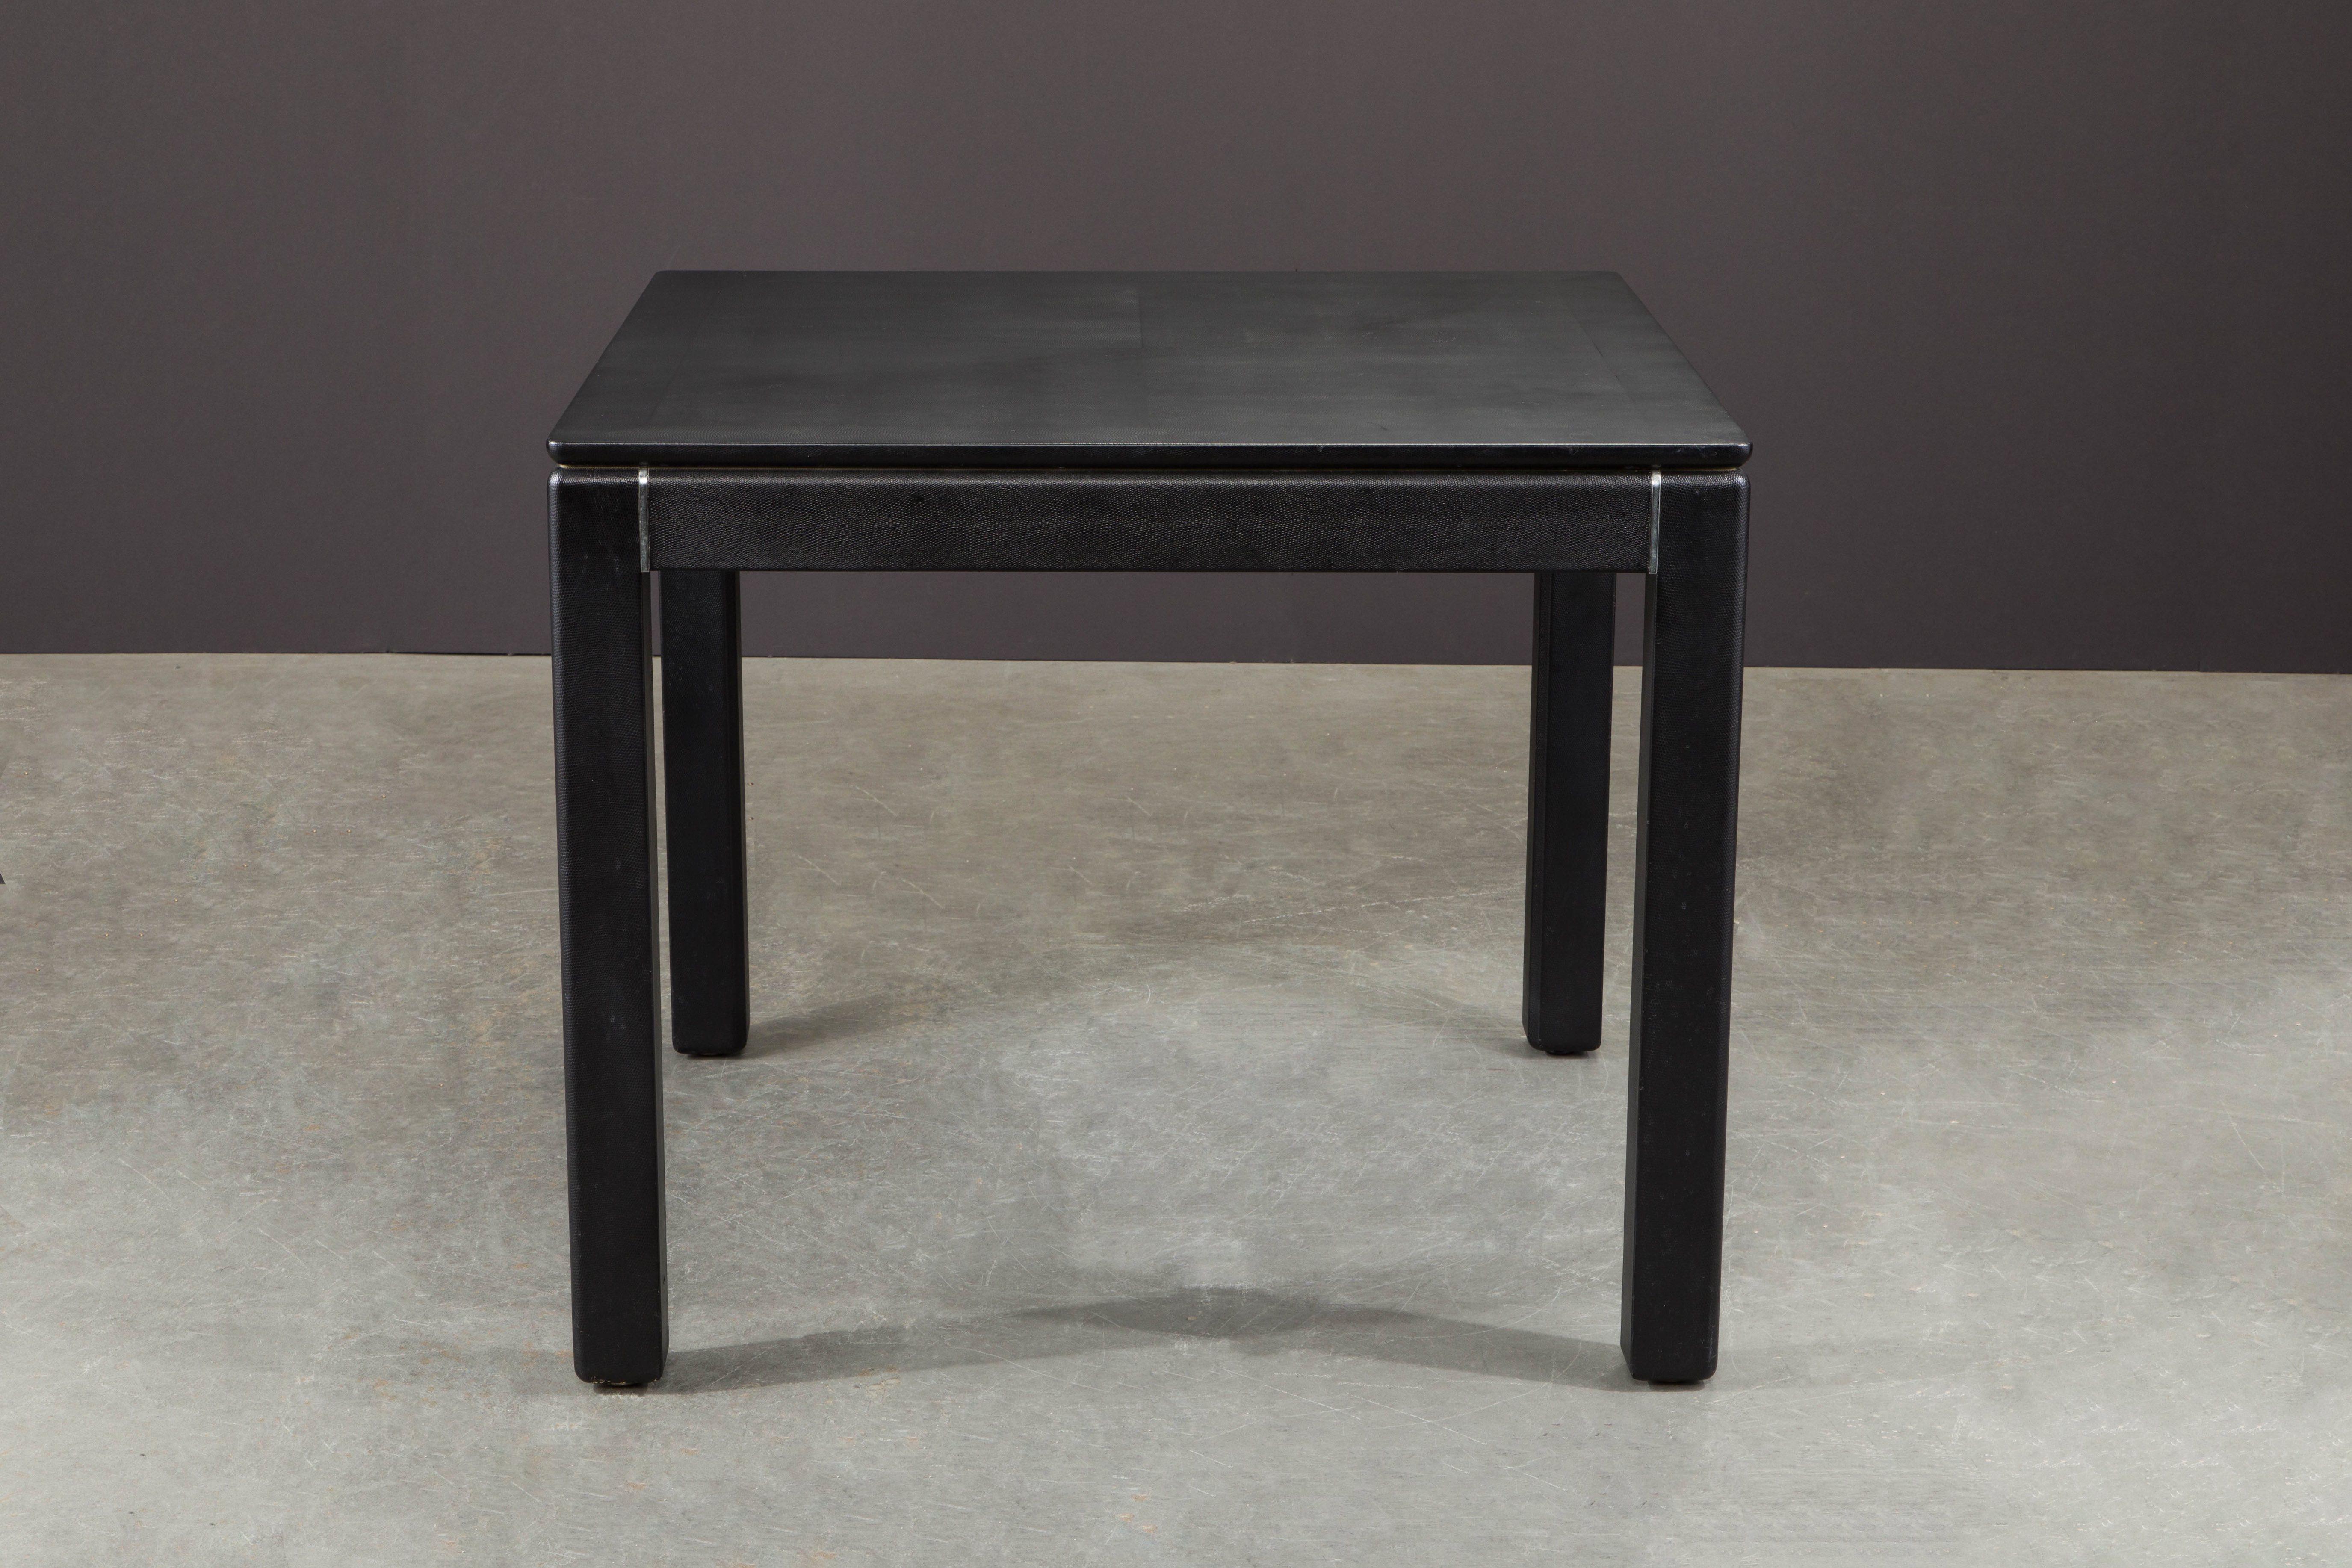 A gorgeous Karl Springer table which is signed and dated underneath table top (see photos) in beautiful black shagreen embossed leather. Signed Karl Springer and dated 1983, this incredible collectors example is ideal for art and design investors